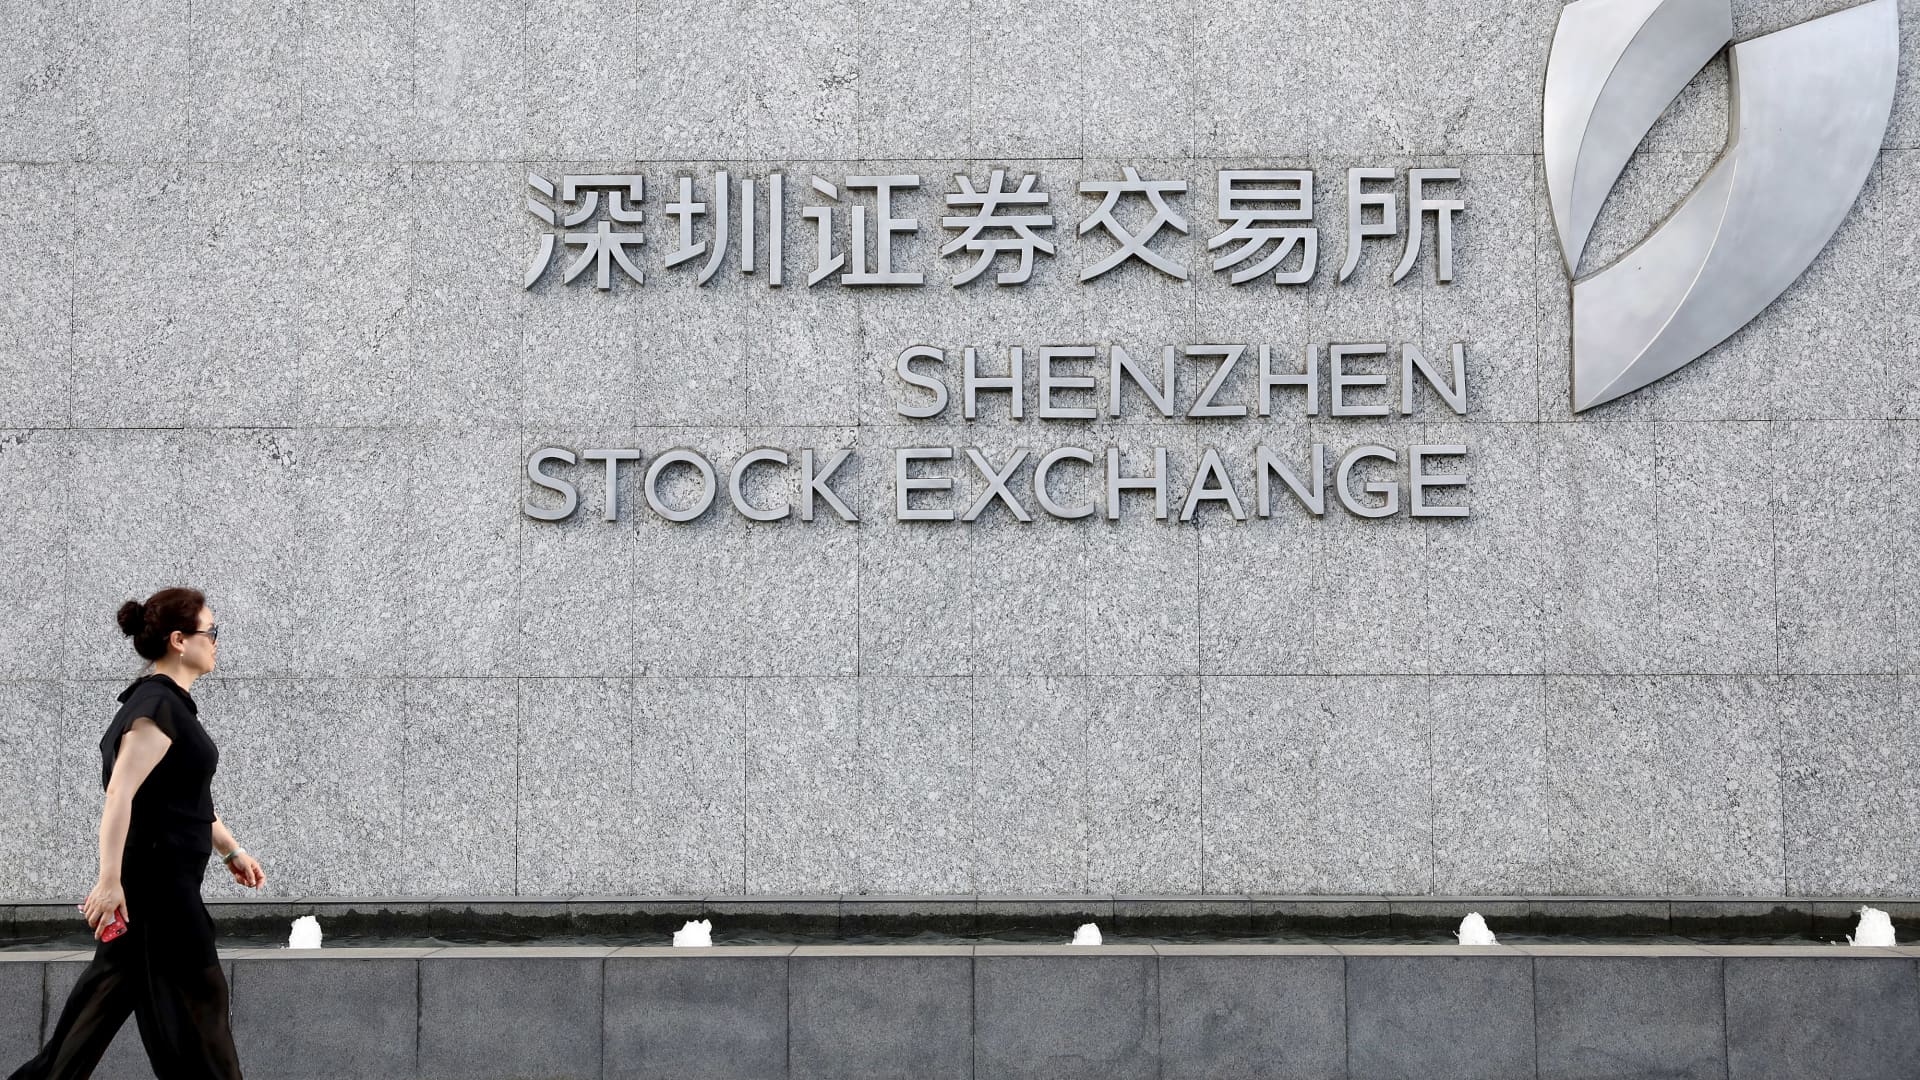 Mainland China stocks rise on return to trade as Asia stocks climb following Fed rate hike – CNBC